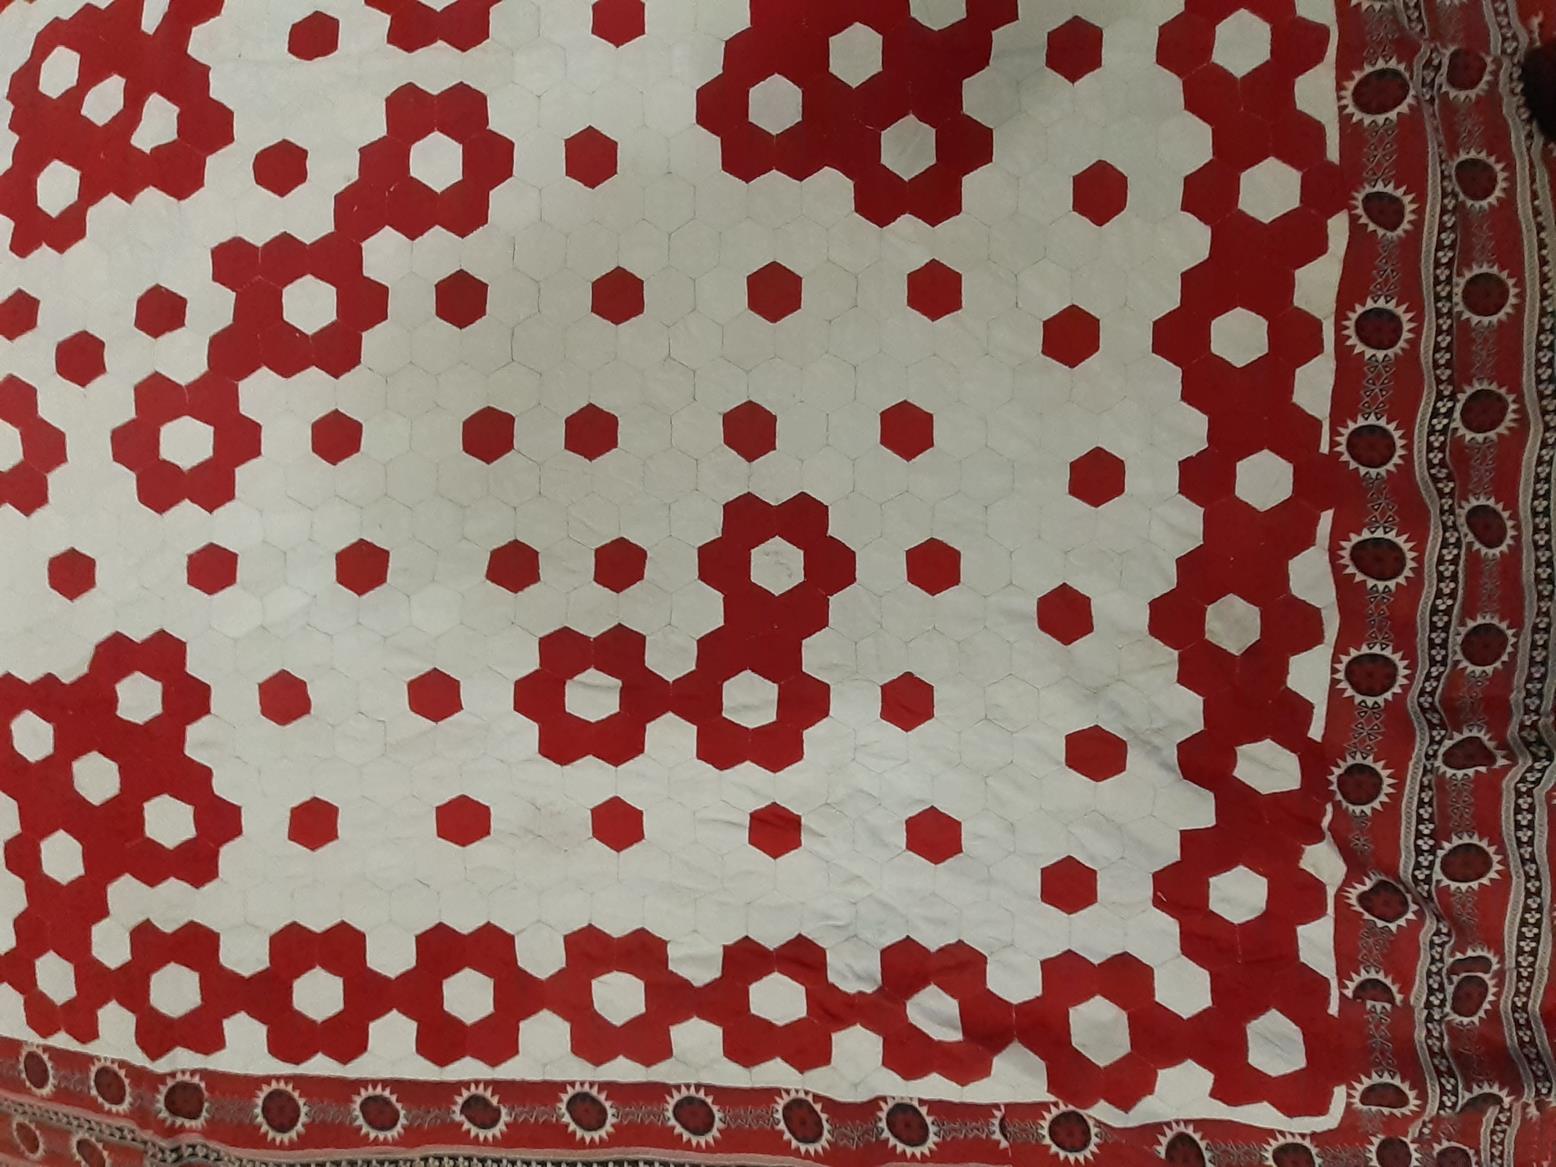 Late 19th Century Red and White Hexagonal Patchwork Quilt, within a red, black and white stripped - Image 3 of 5